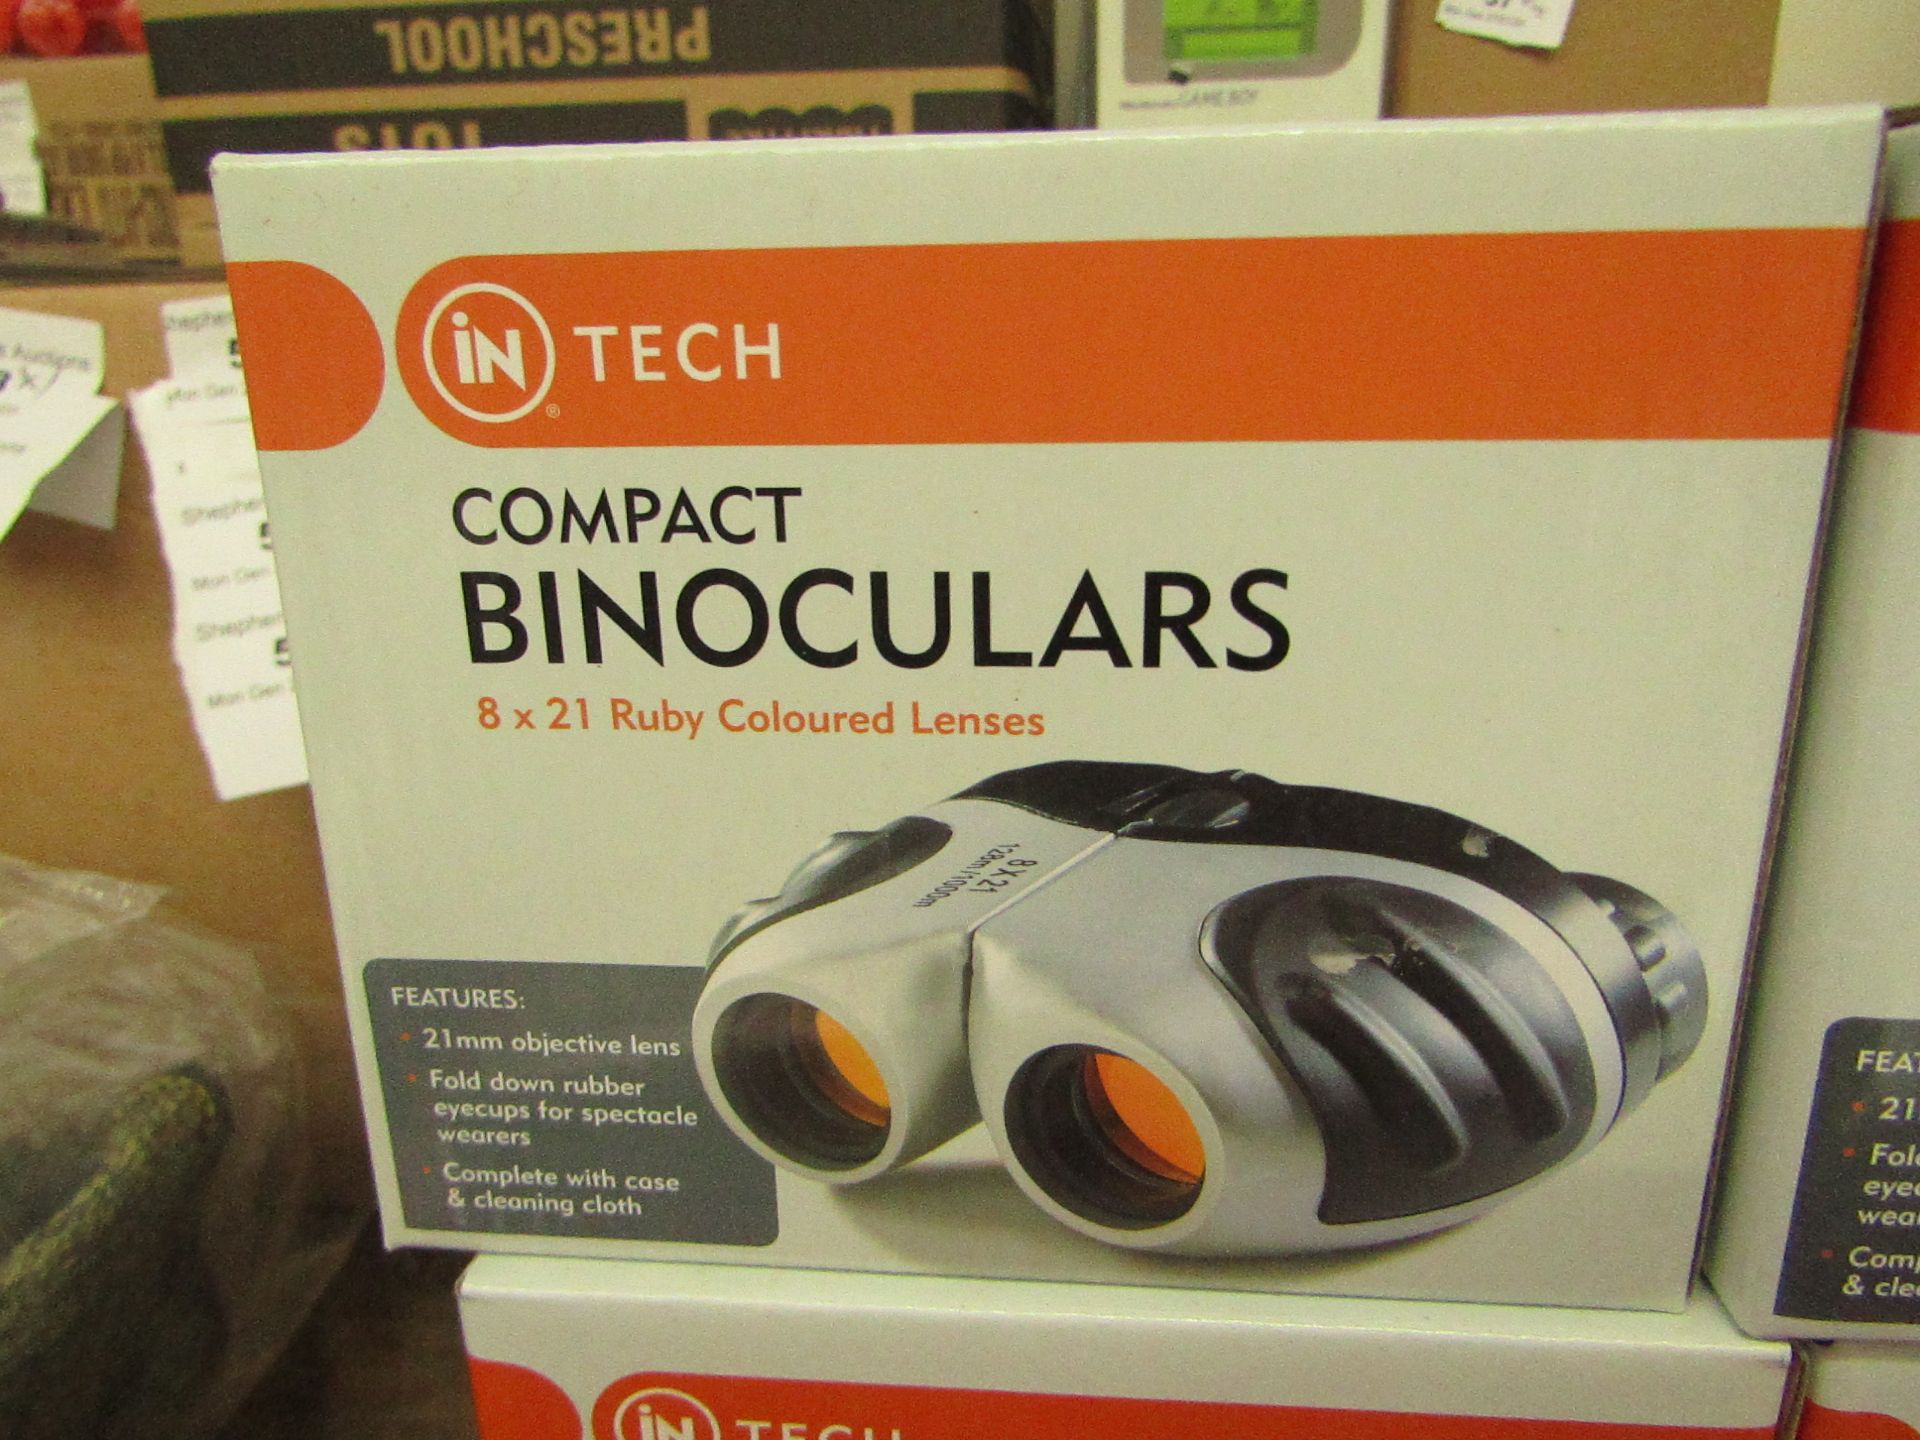 InTech Compact Binoculars. 8 x 21 Ruby Coloured Lenses. RRP £31.99 on ebay New & Boxed